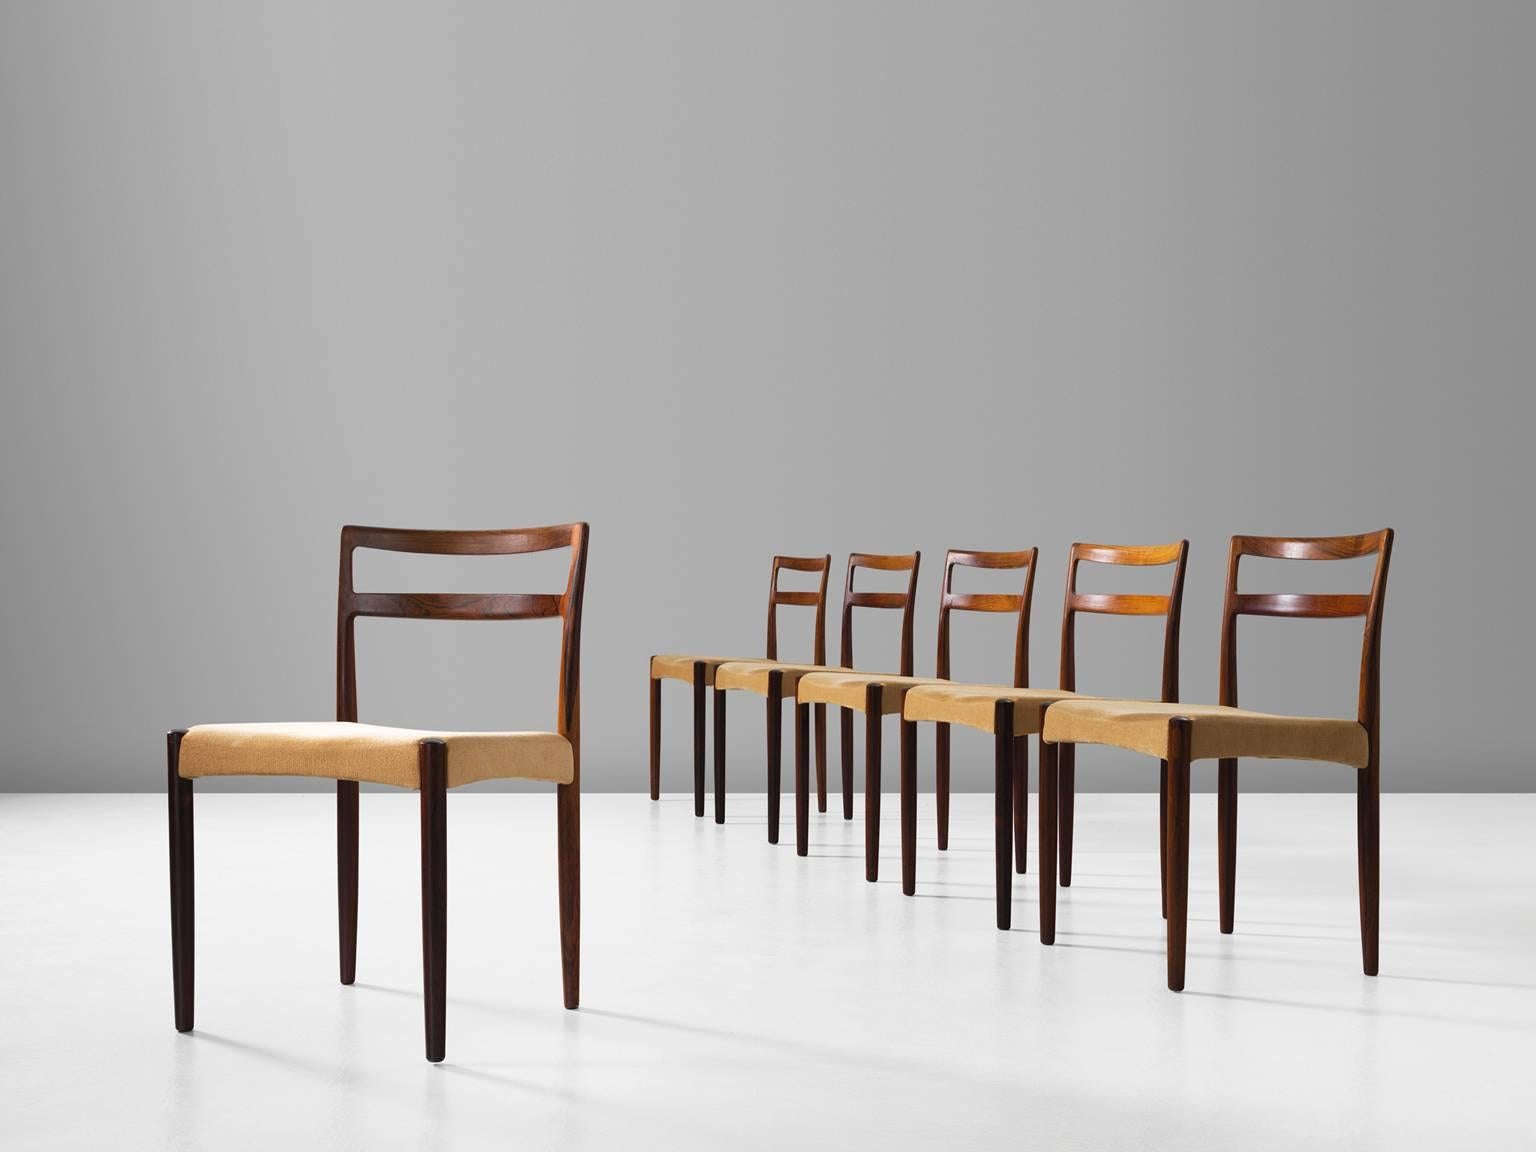 Set of six dining chairs, in rosewood and fabric, by Harry Ostergaard for Randers Møbelfabrik, Denmark, 1961.

Set of six dining chairs in rosewood with fabric upholstery. The basic and linear character of the wooden frame gives these chairs some